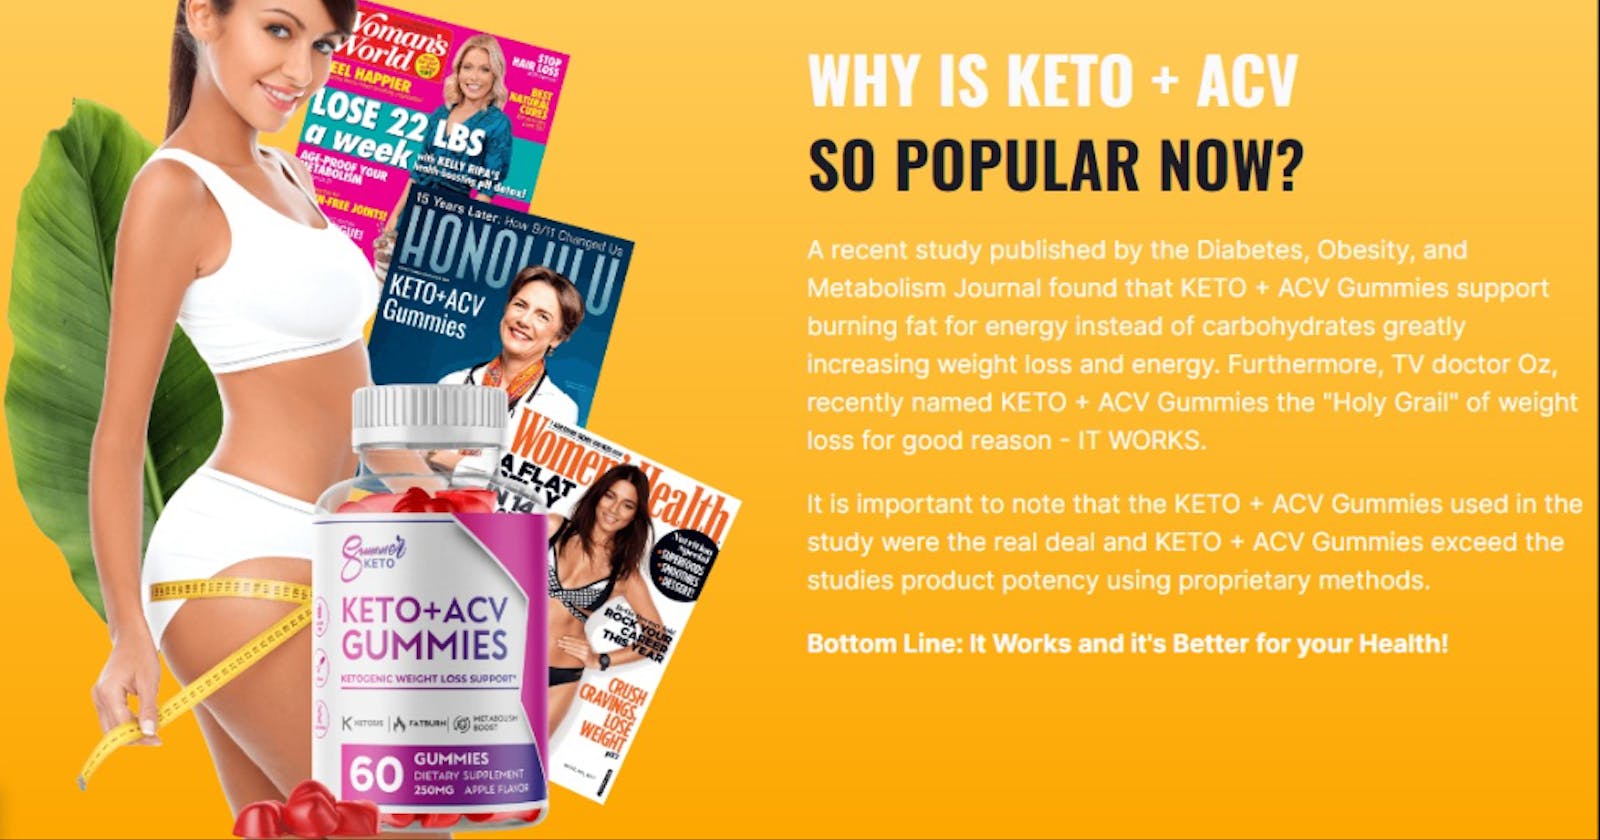 Summer Keto + ACV Gummies - Effective Product Good For You, Where To Buy!